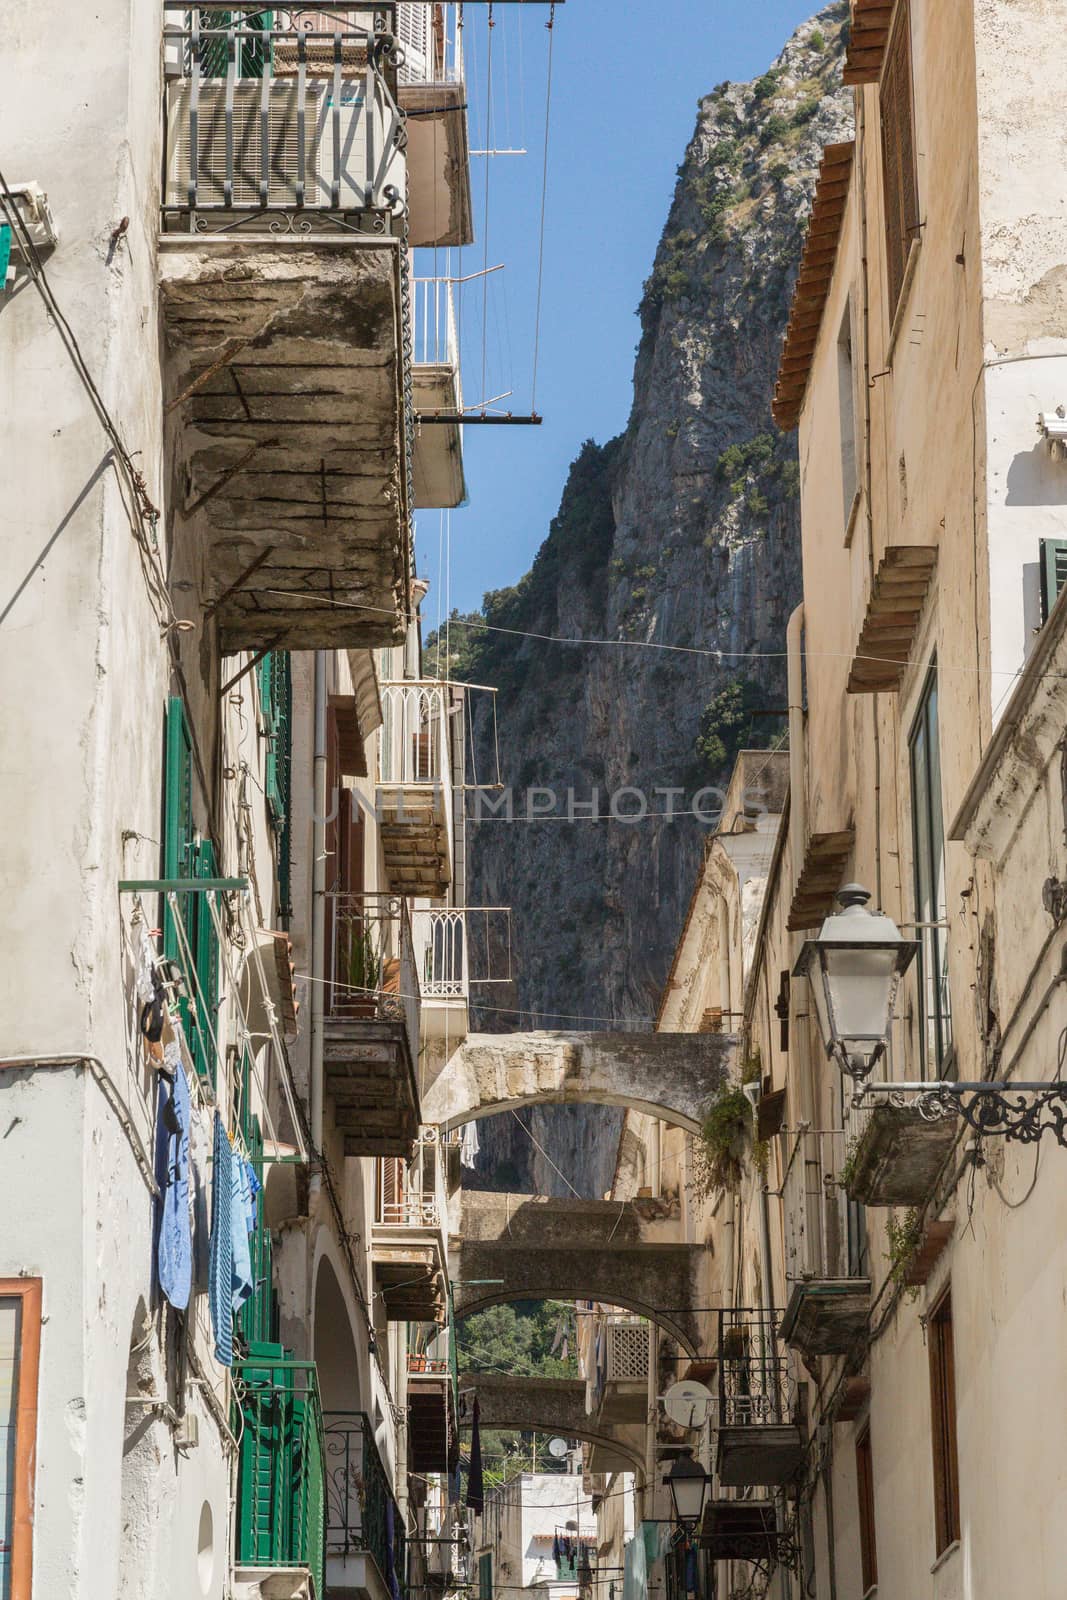 A typical Italian alley or side street.  This one is in Positano on the Amalfi coast.